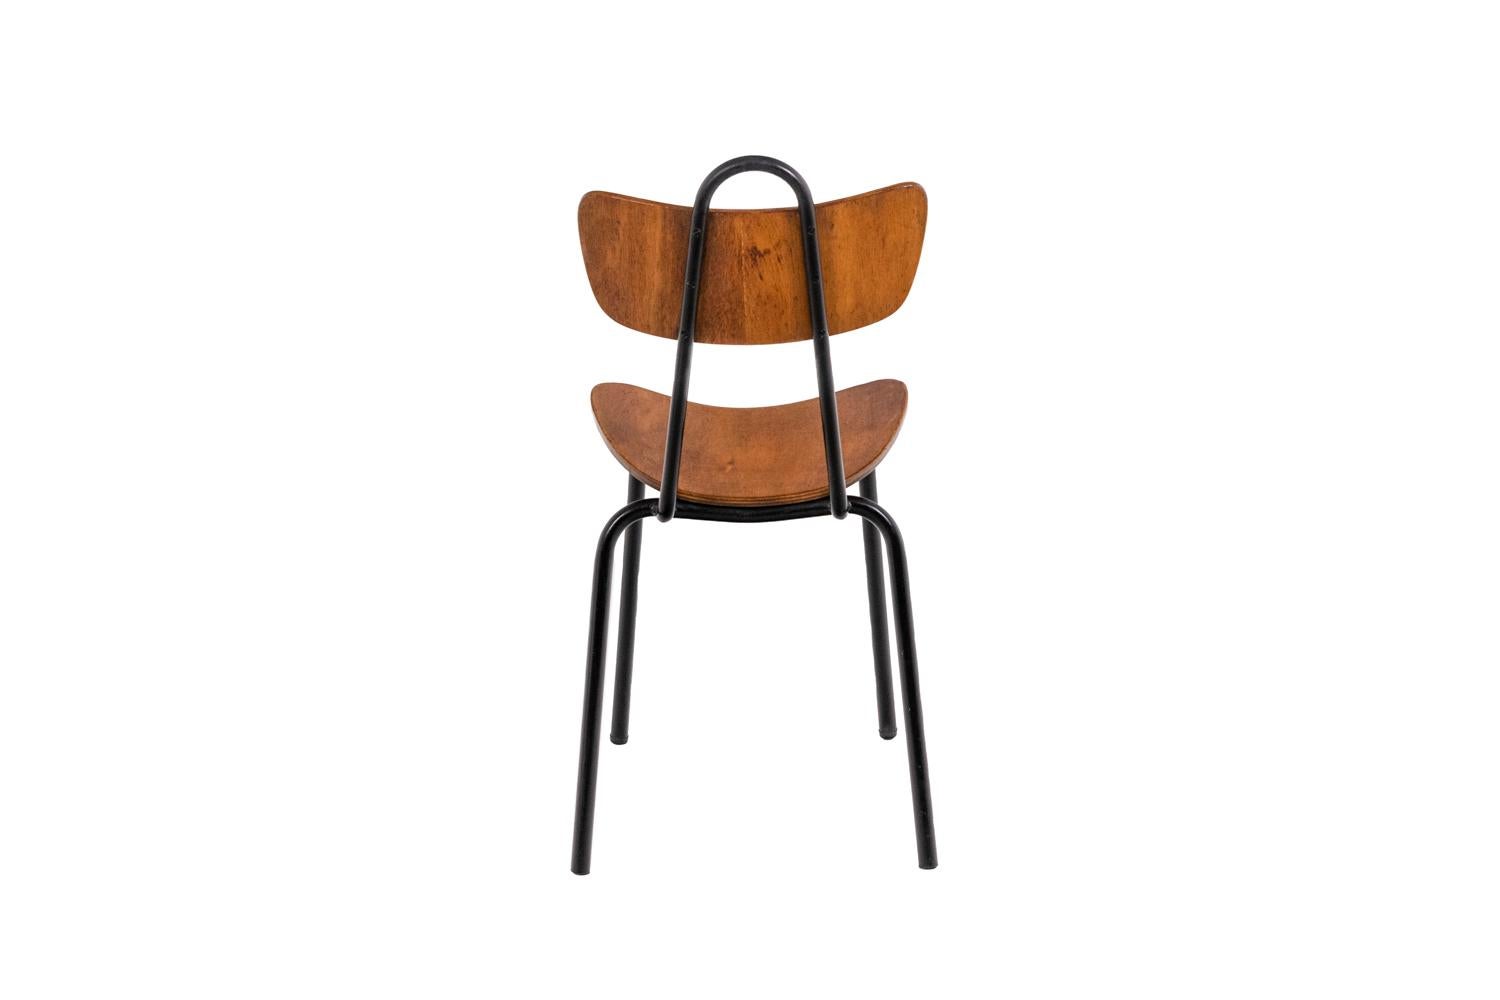 Mid-20th Century Series of Four Chairs in Wood and Metal, 1950s For Sale